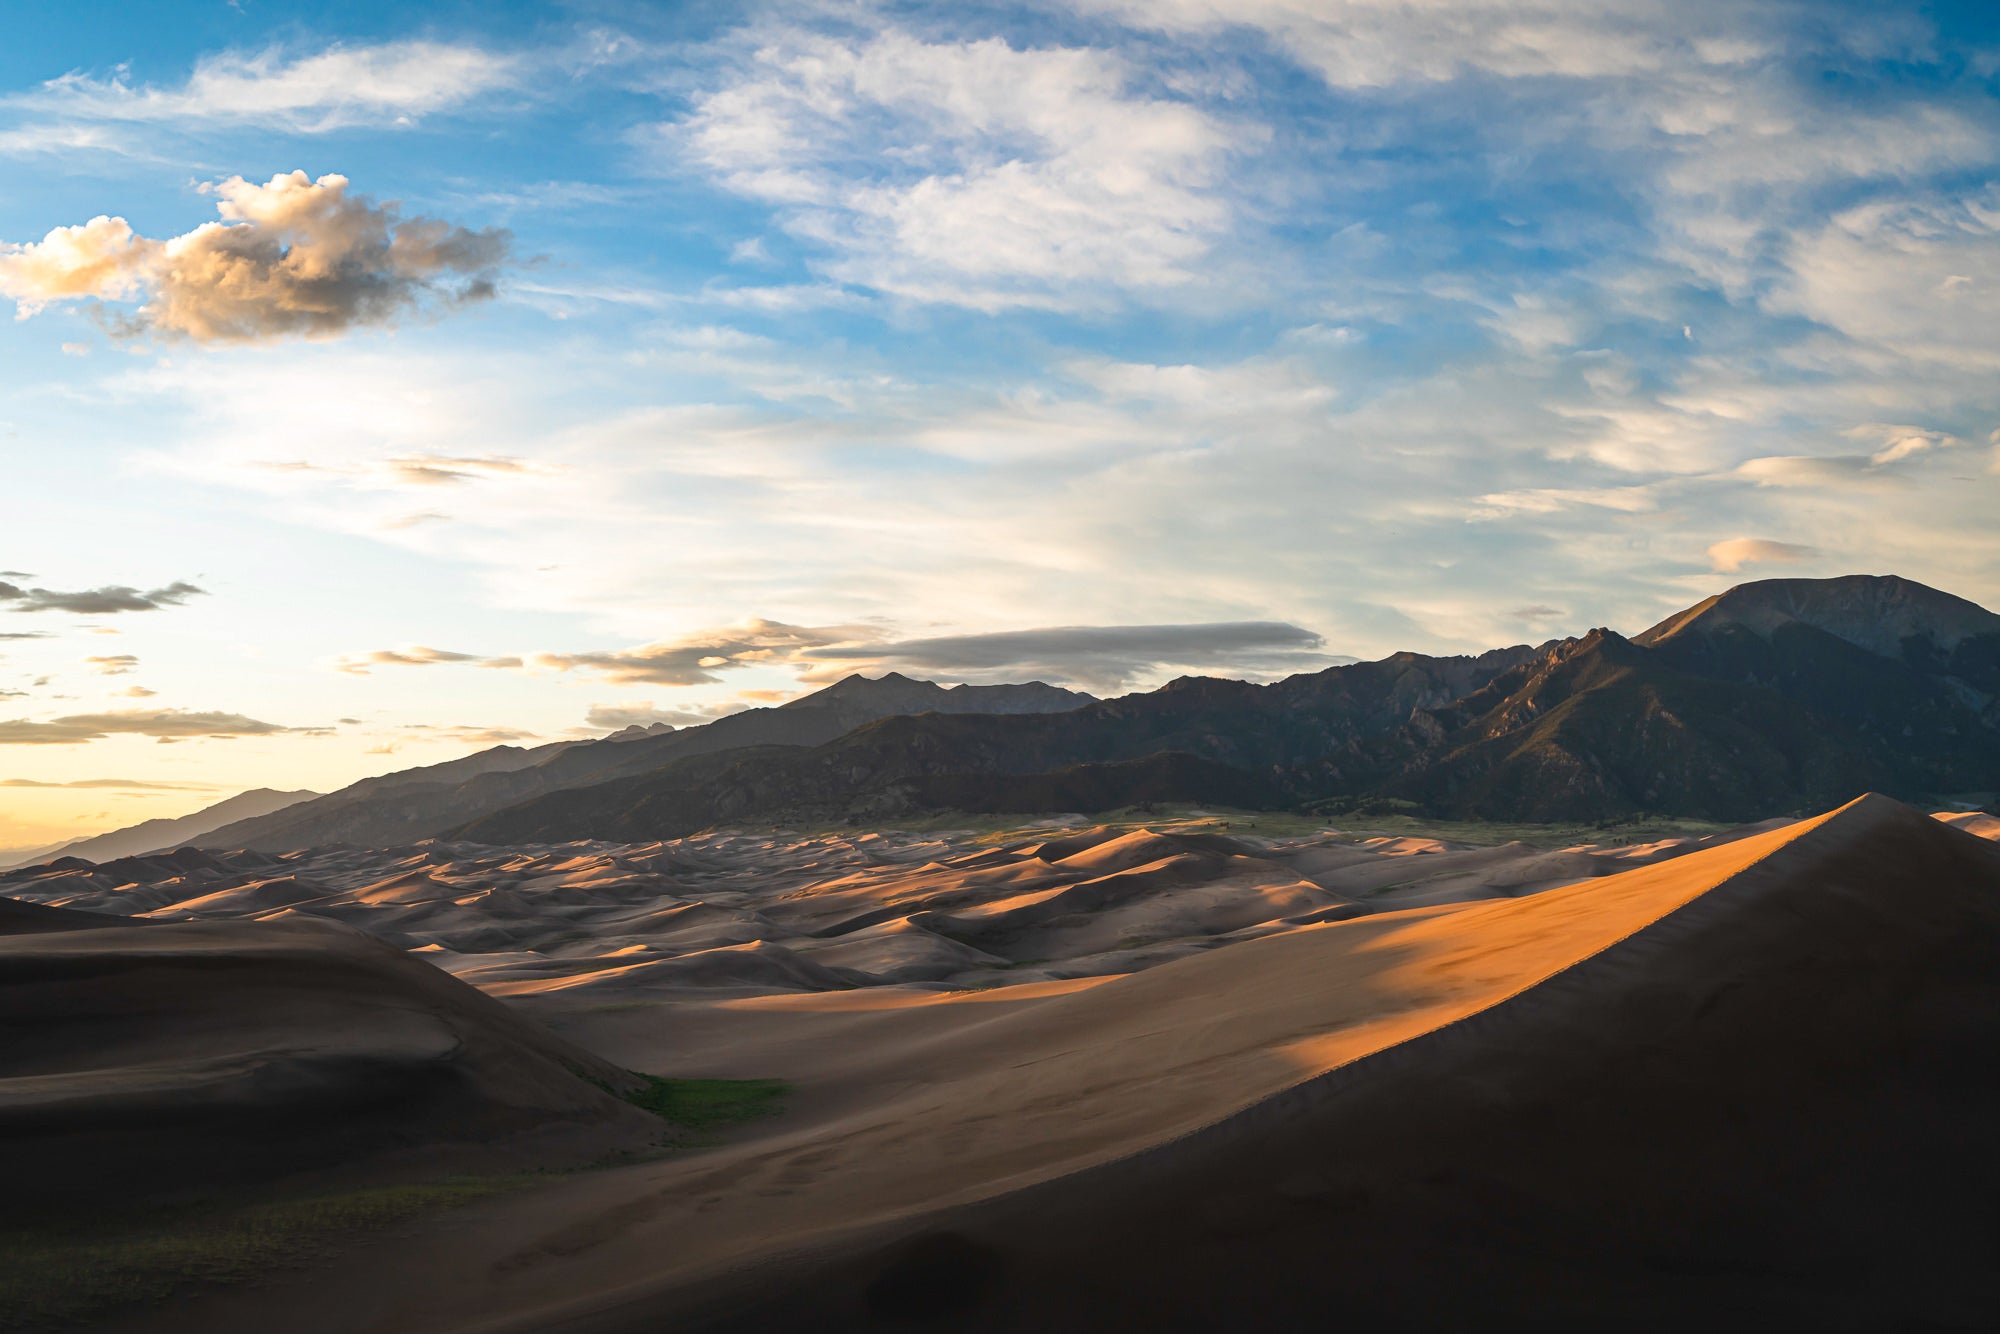 A sunset in Great Sand Dunes National Park in southern Colorado. Photo by Dylan McMains. Sony Alpha 7R II. Sony 16-35mm f/2.8 G Master. 1/500-sec., f/4, ISO 250